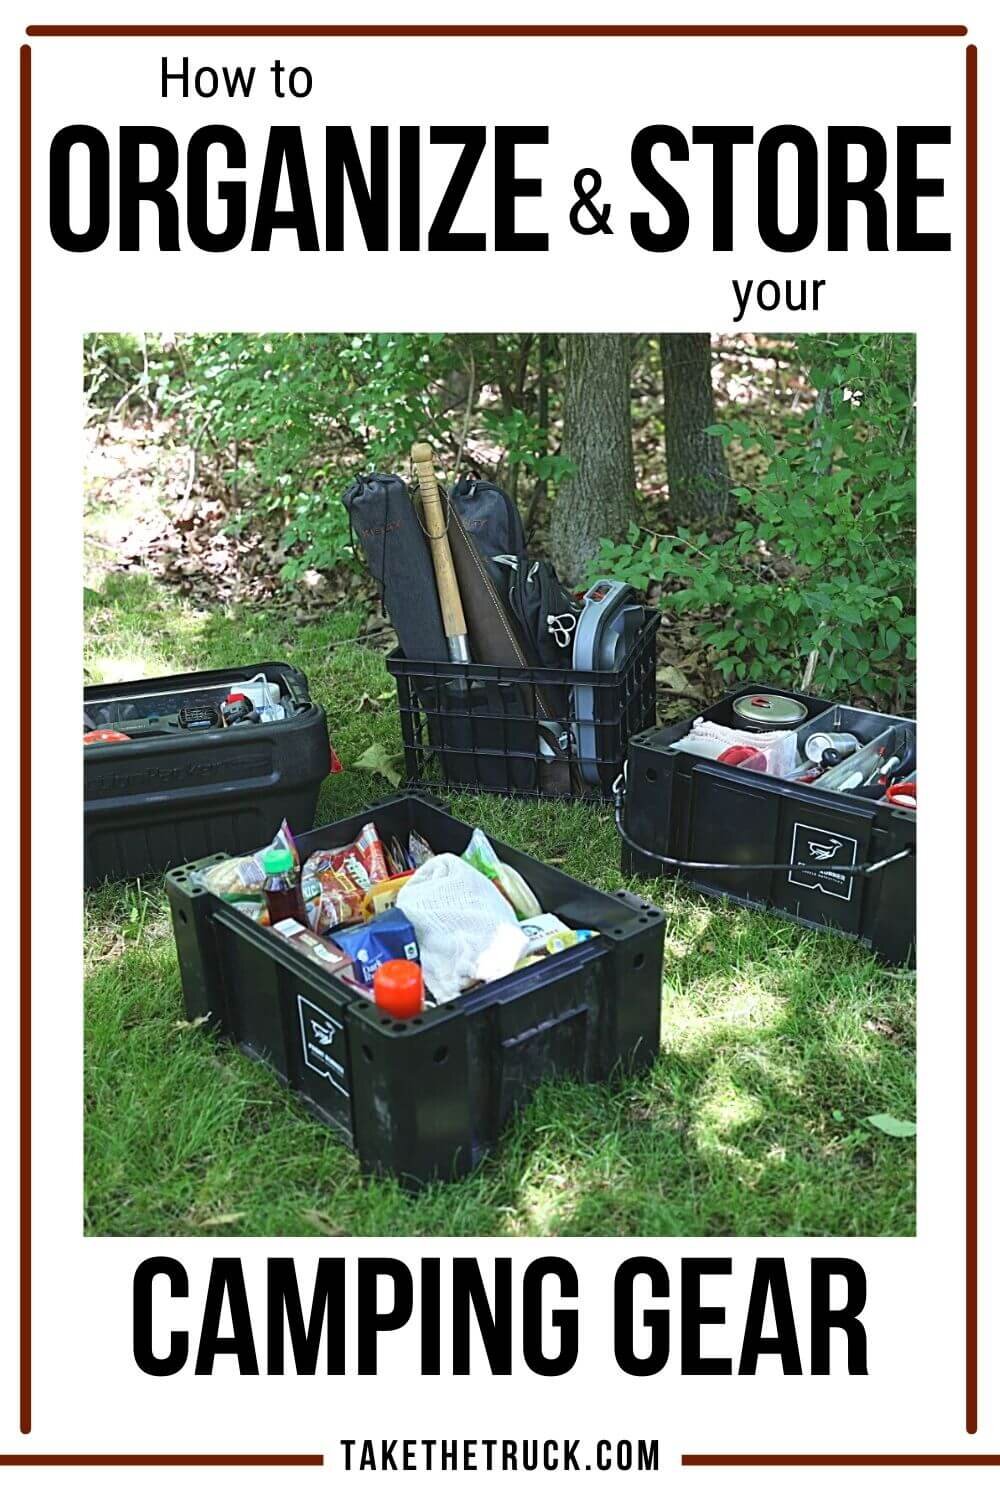 Finally organized camping supplies with a shoe organizer : r/camping